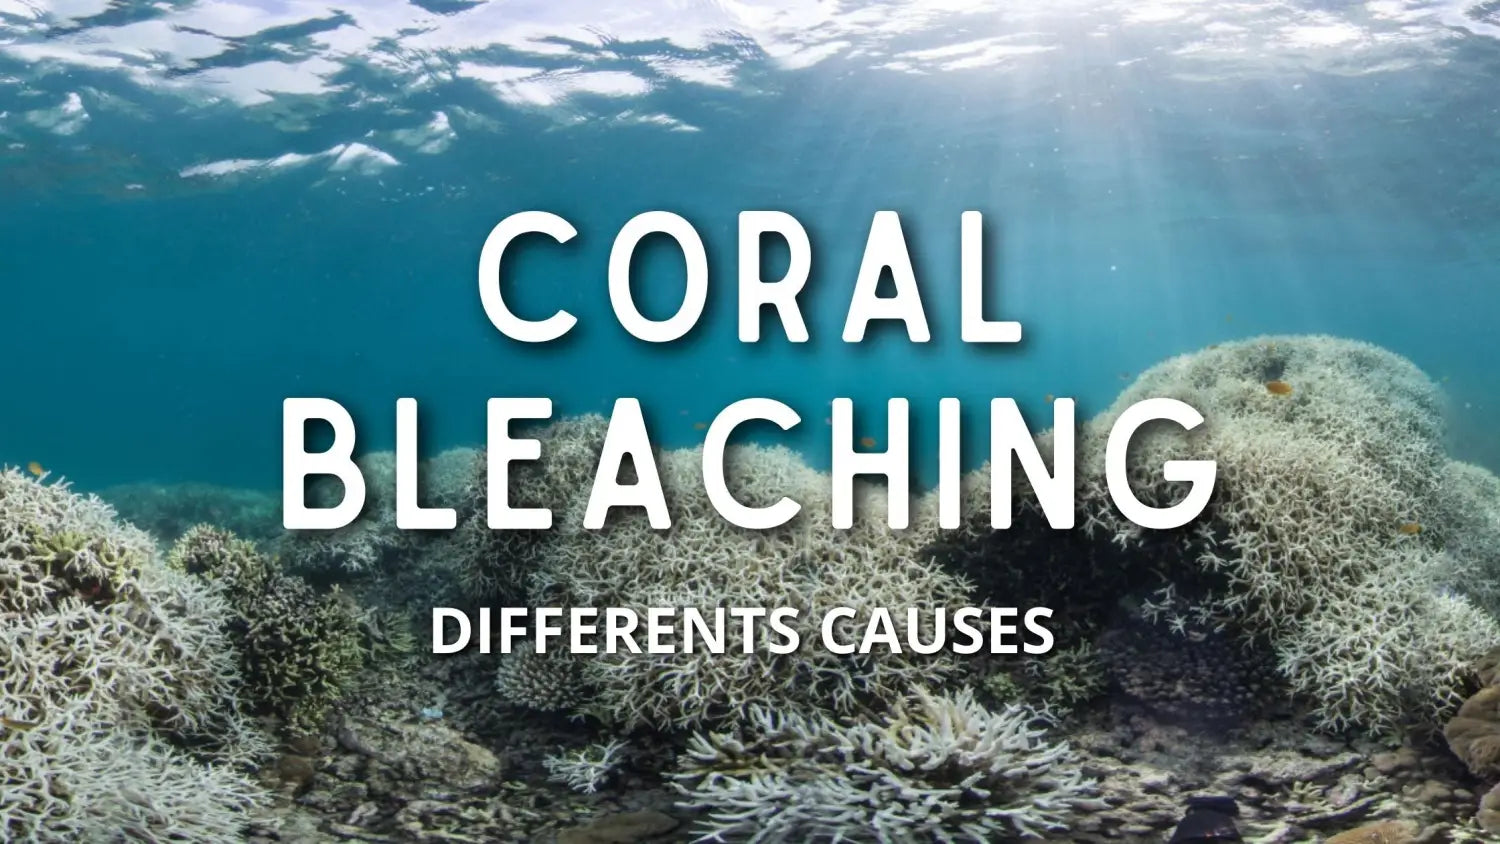 Causes of Coral Bleaching